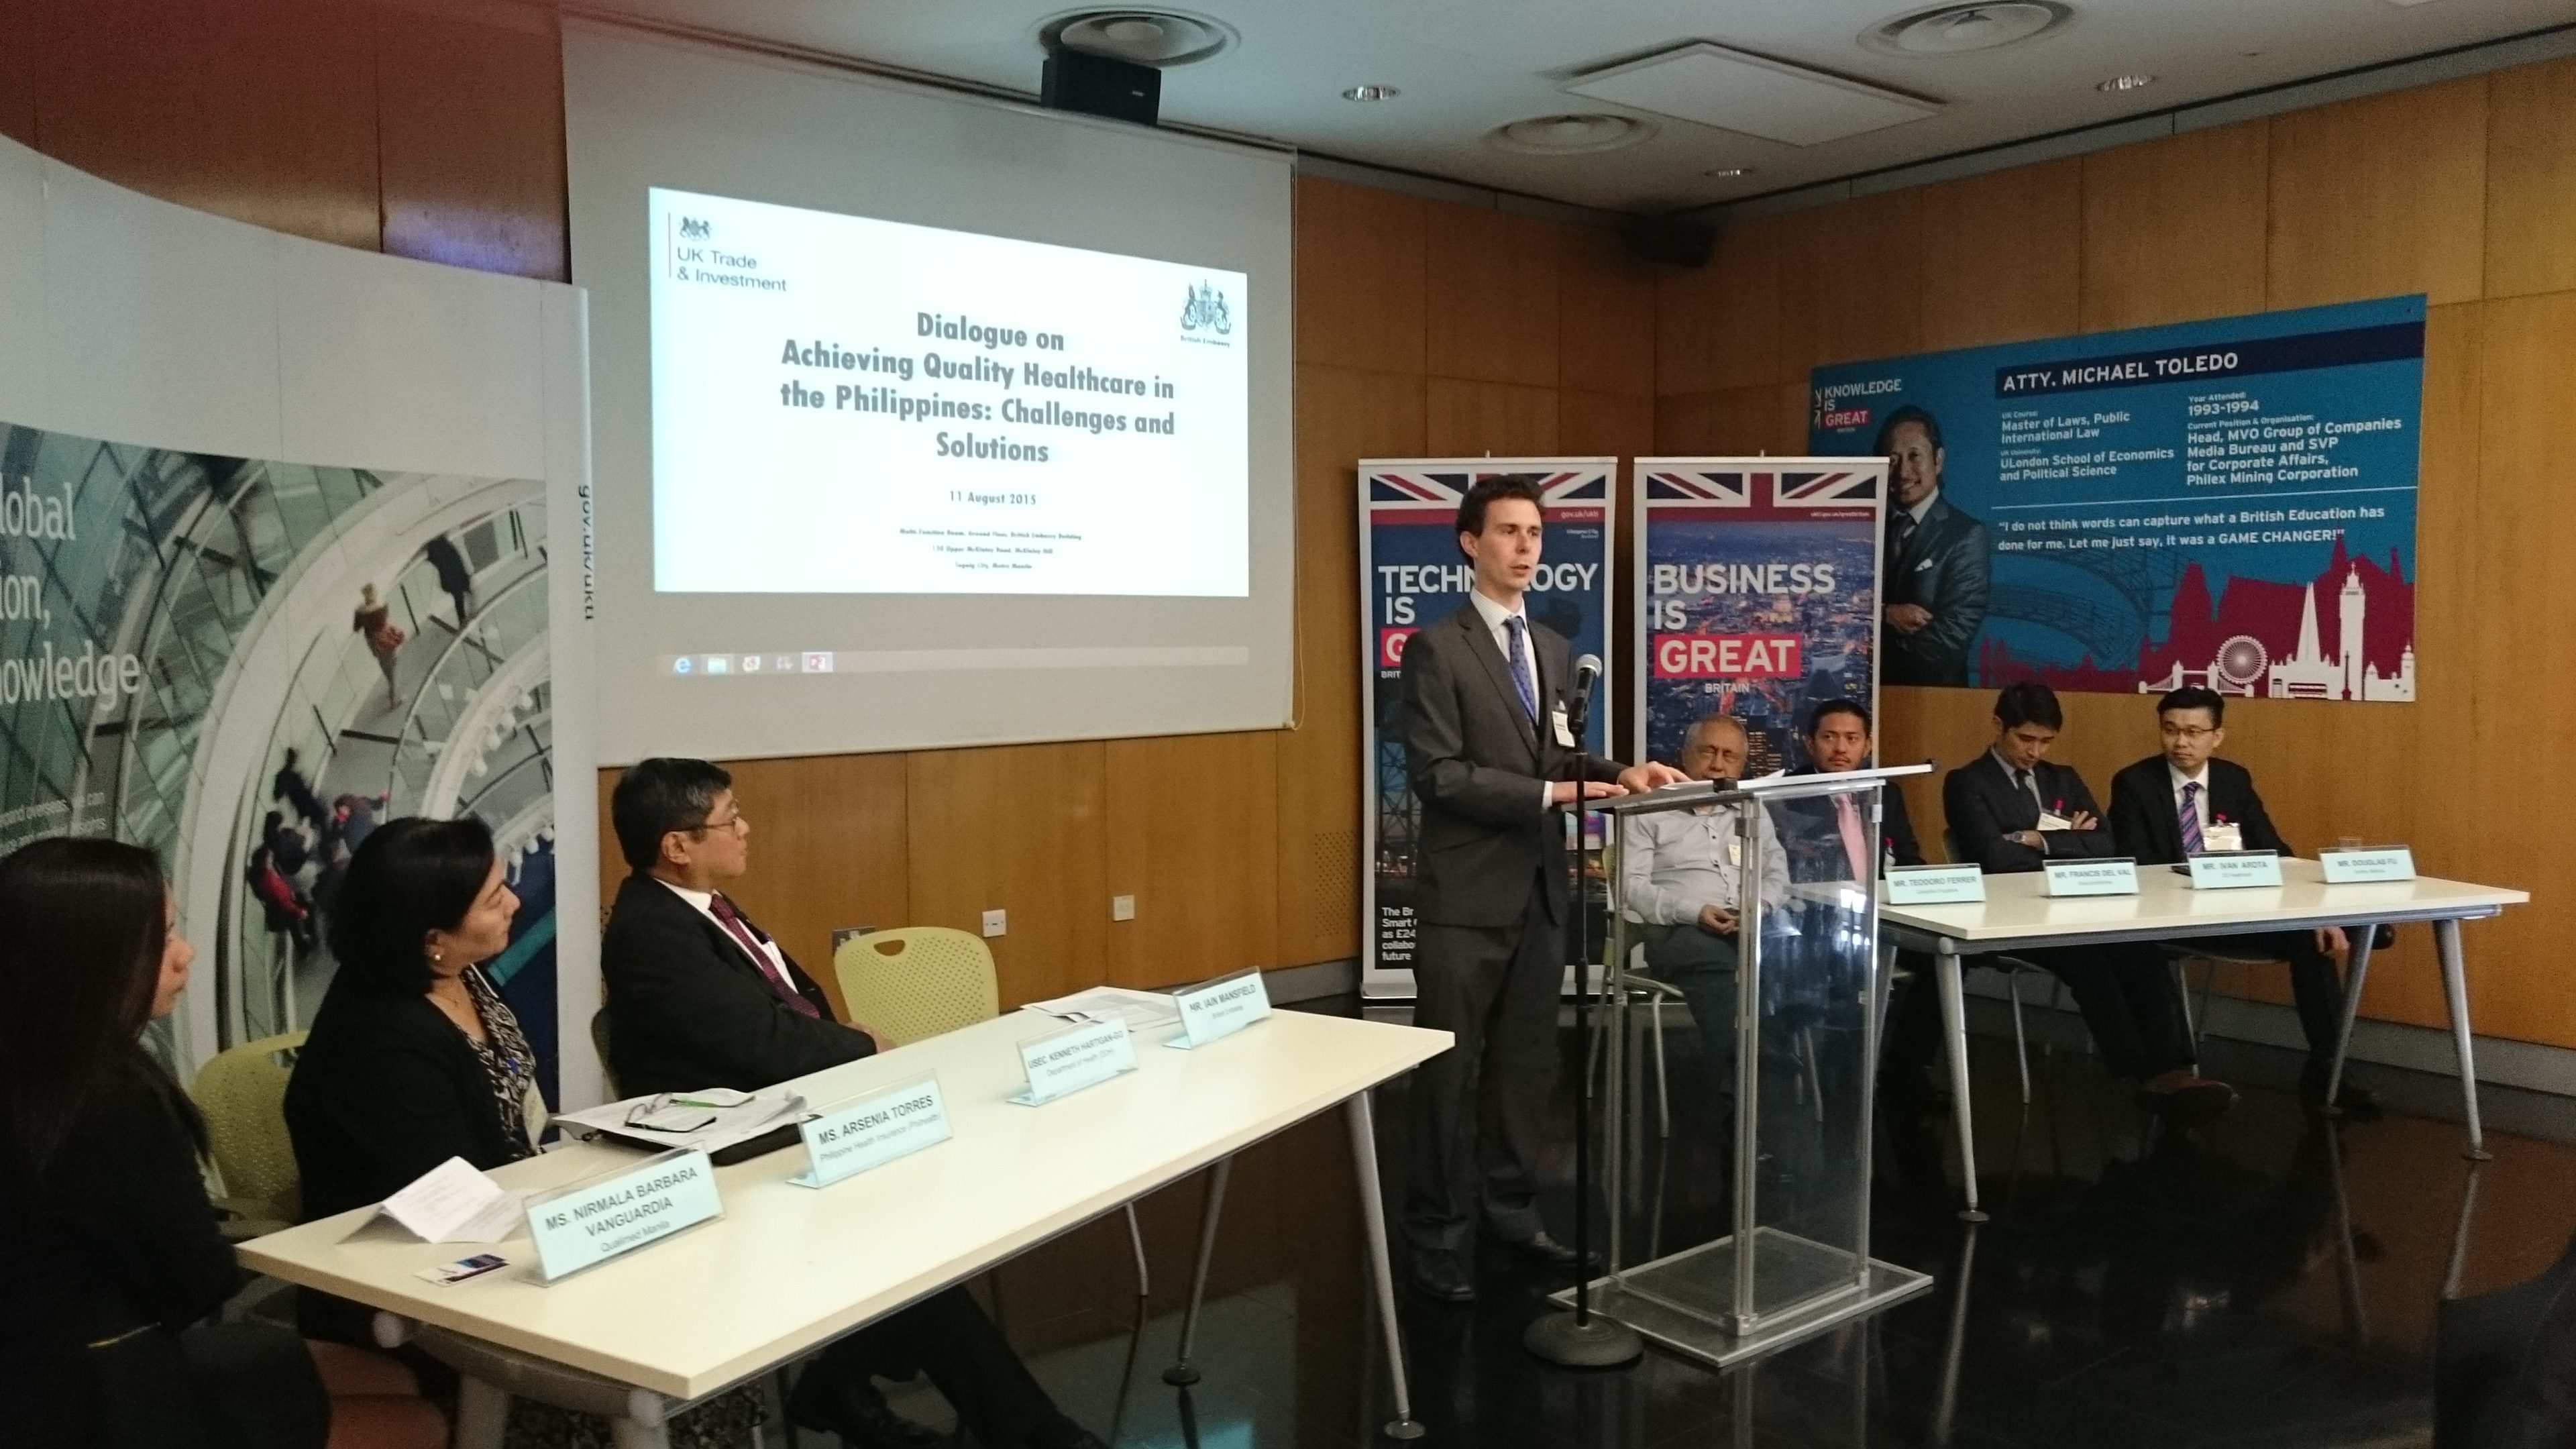 DEBATE. UK Trade and Investment Director Ian Mansfield (standing) leads a debate about the health care sector at a forum hosted by the British embassy Tuesday, August 11, 2015. Photo by Chris Schnabel / Rappler   